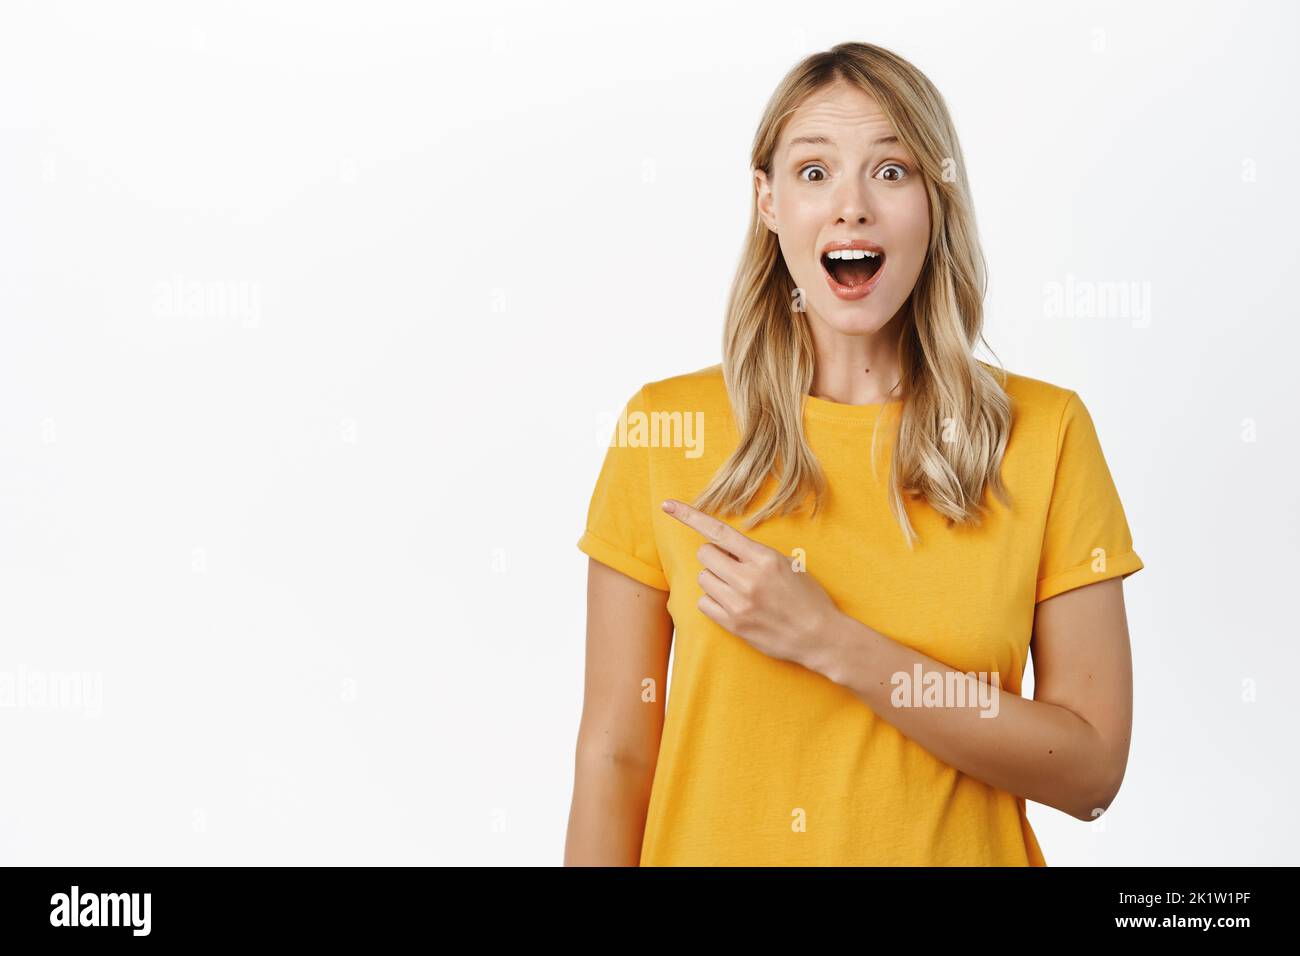 Smiling beautiful blond girl showing announcement, pointing at advertisement, empty copy space, standing in yellow t-shirt over white background. Stock Photo